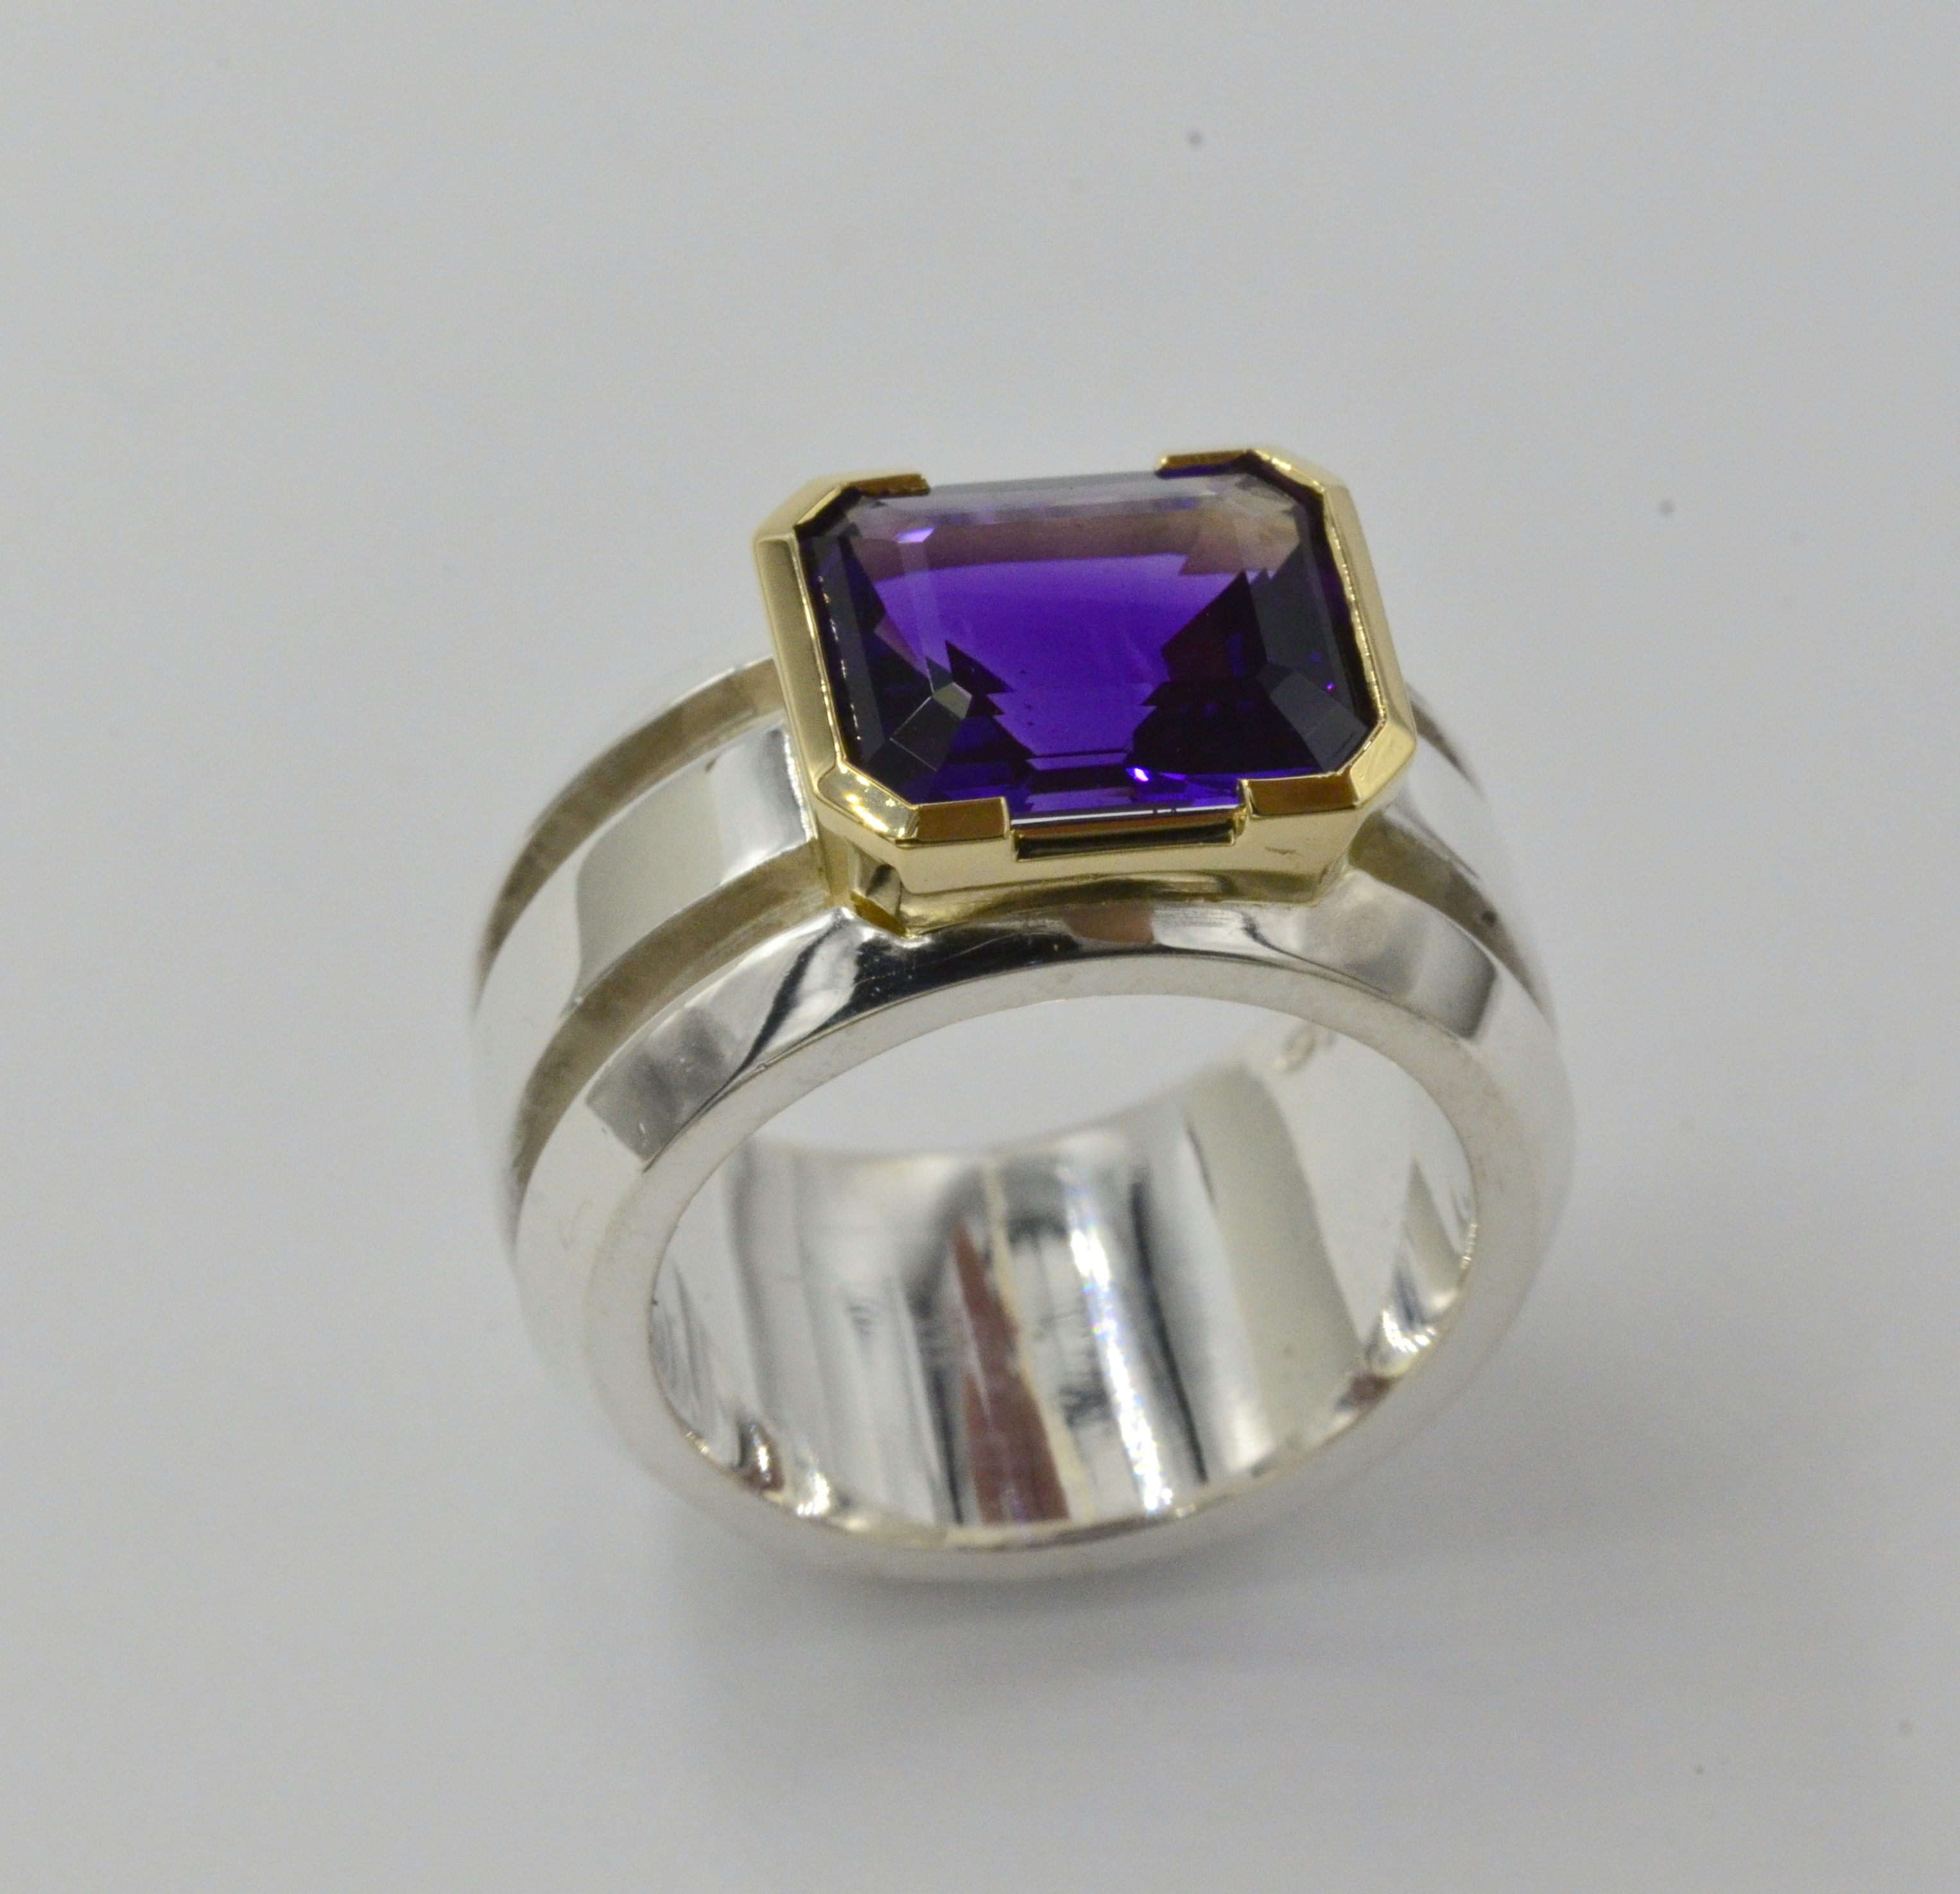 Beautiful Rich Deep Purple Amethyst with Purple/Red interior flashes of color. 